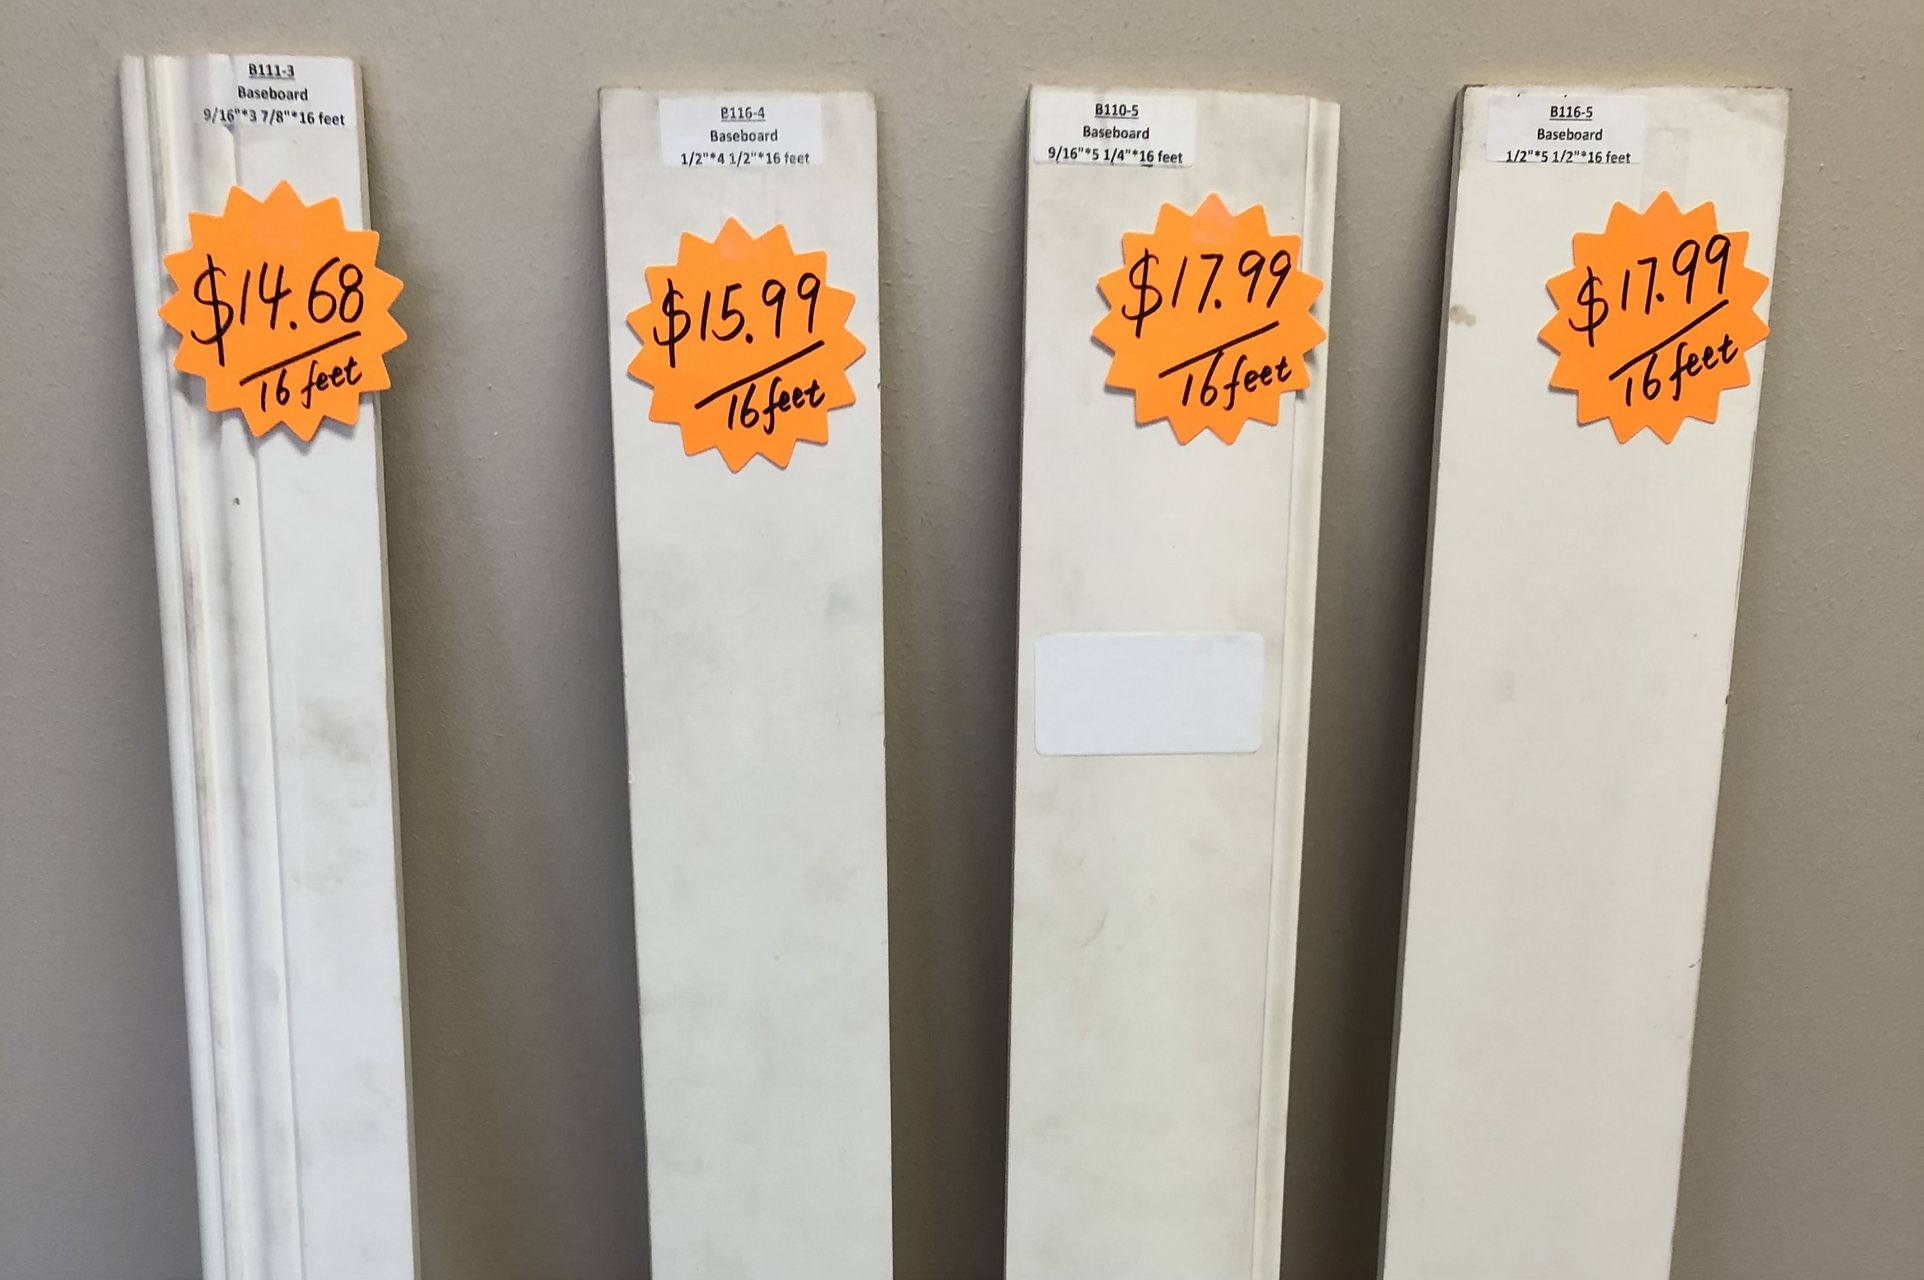 Baseboard for Sale 